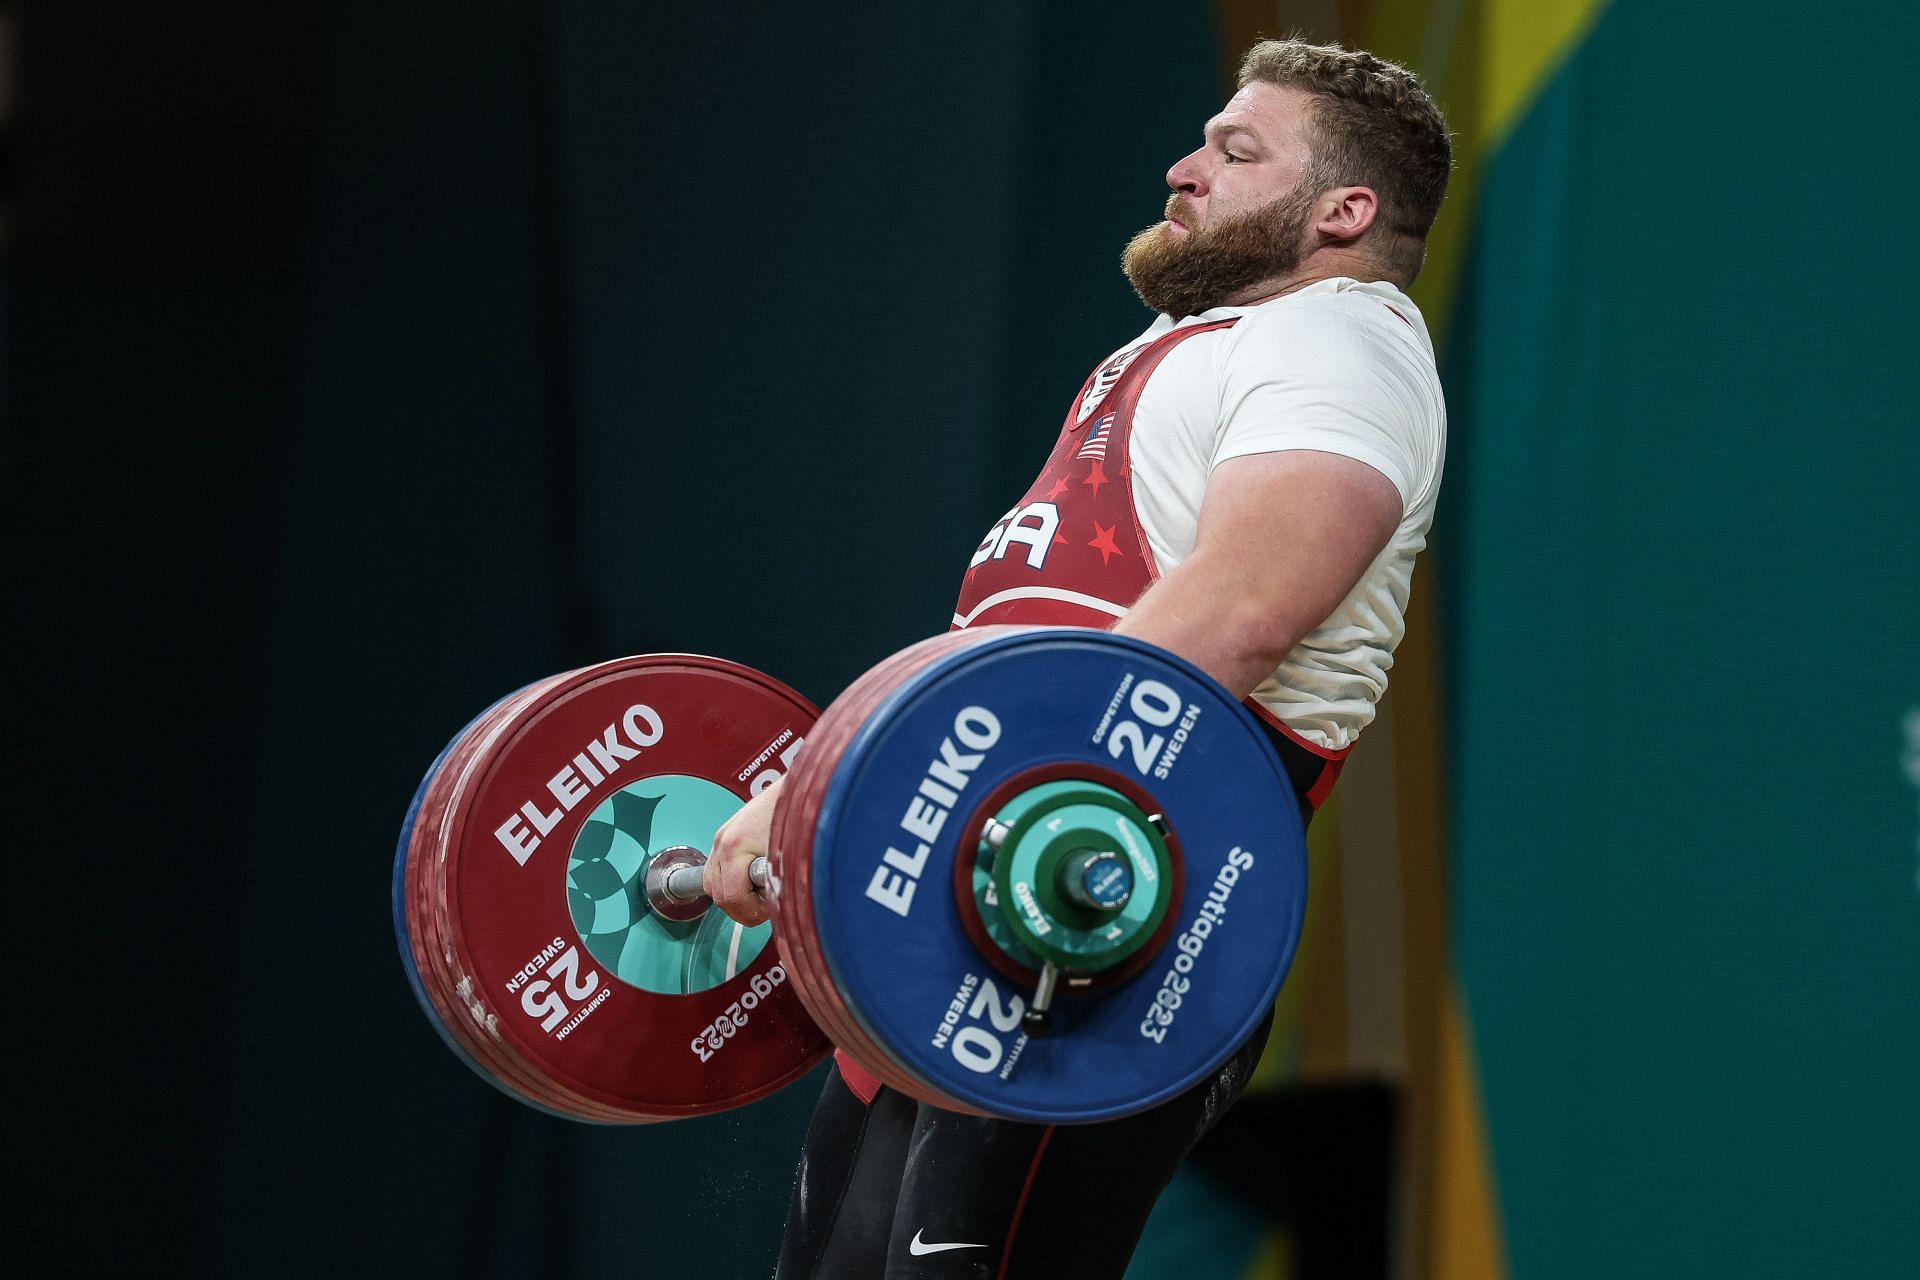 Keiser Witte competes during Weightlifting Men&#039;s +102Kg at the 2023 Pan Am Games in Santiago, Chile.